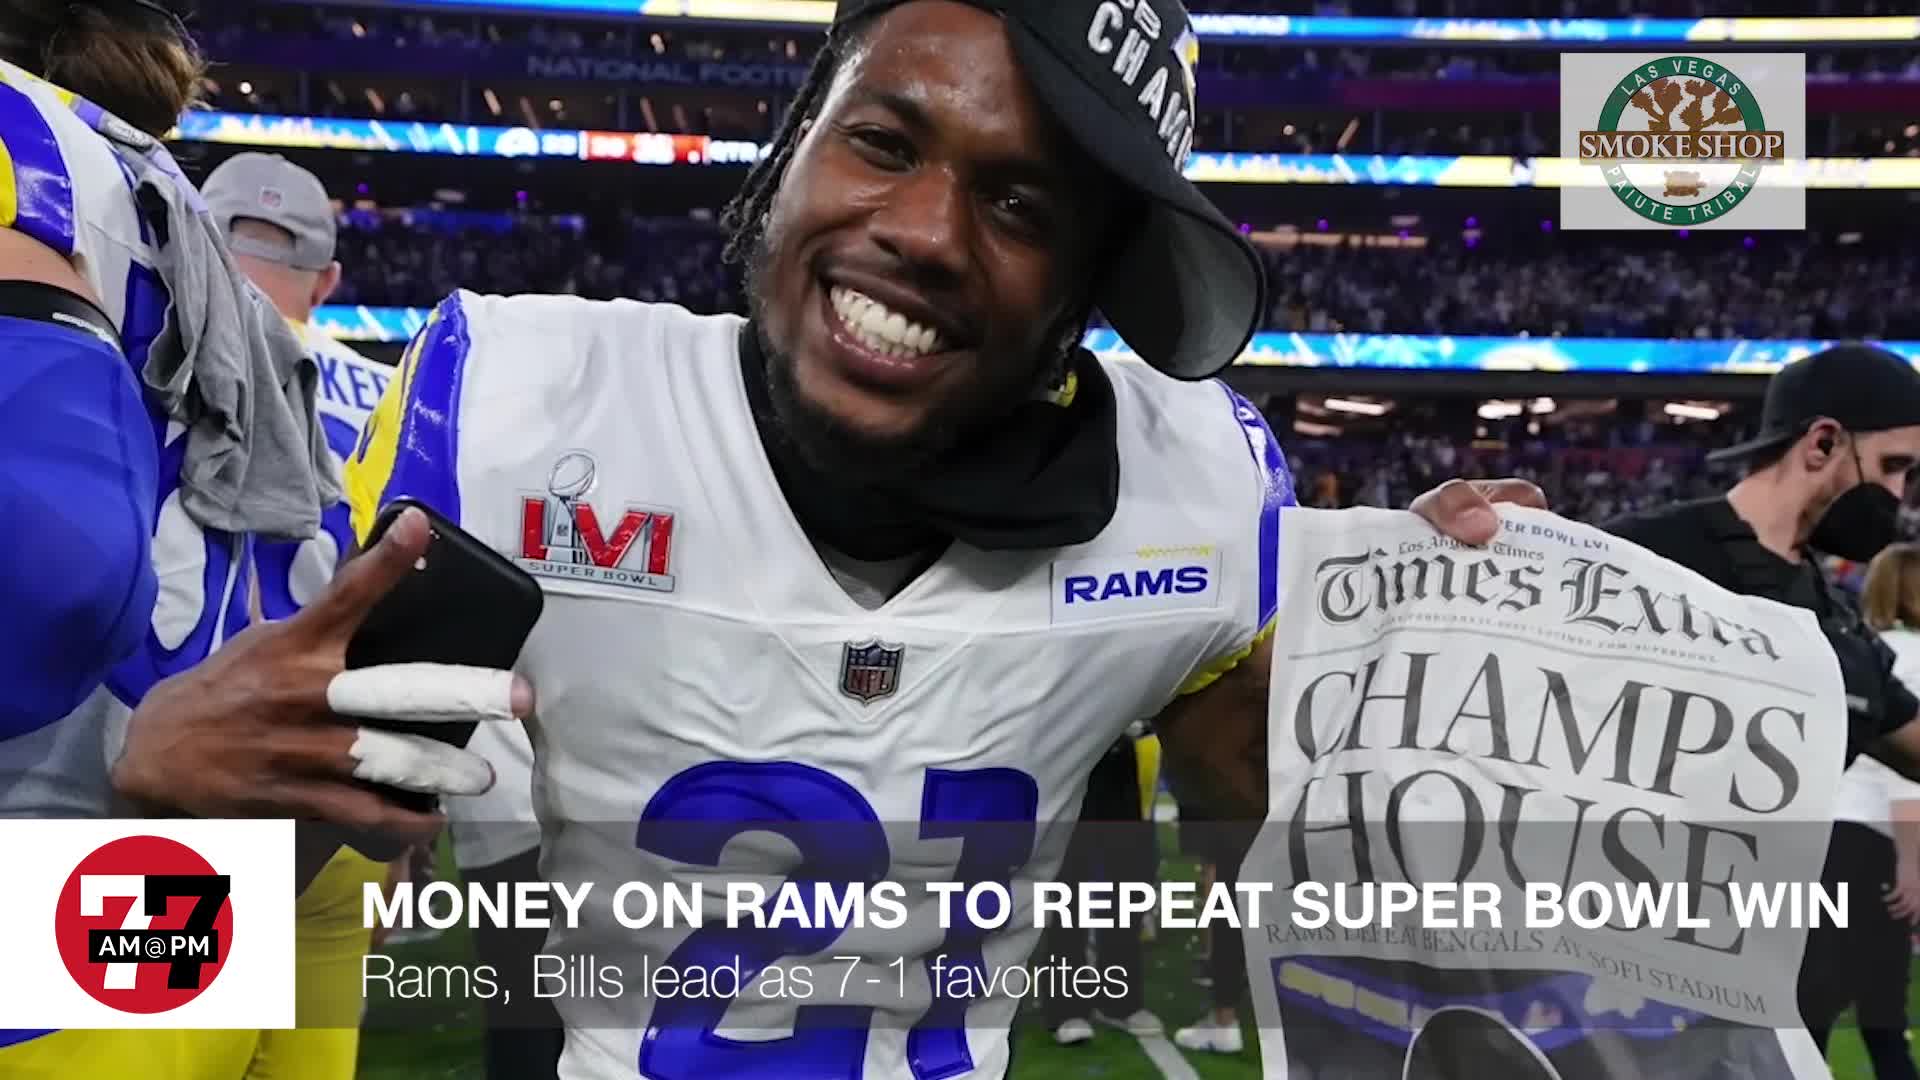 Money on Rams to Repeat Super Bowl Win